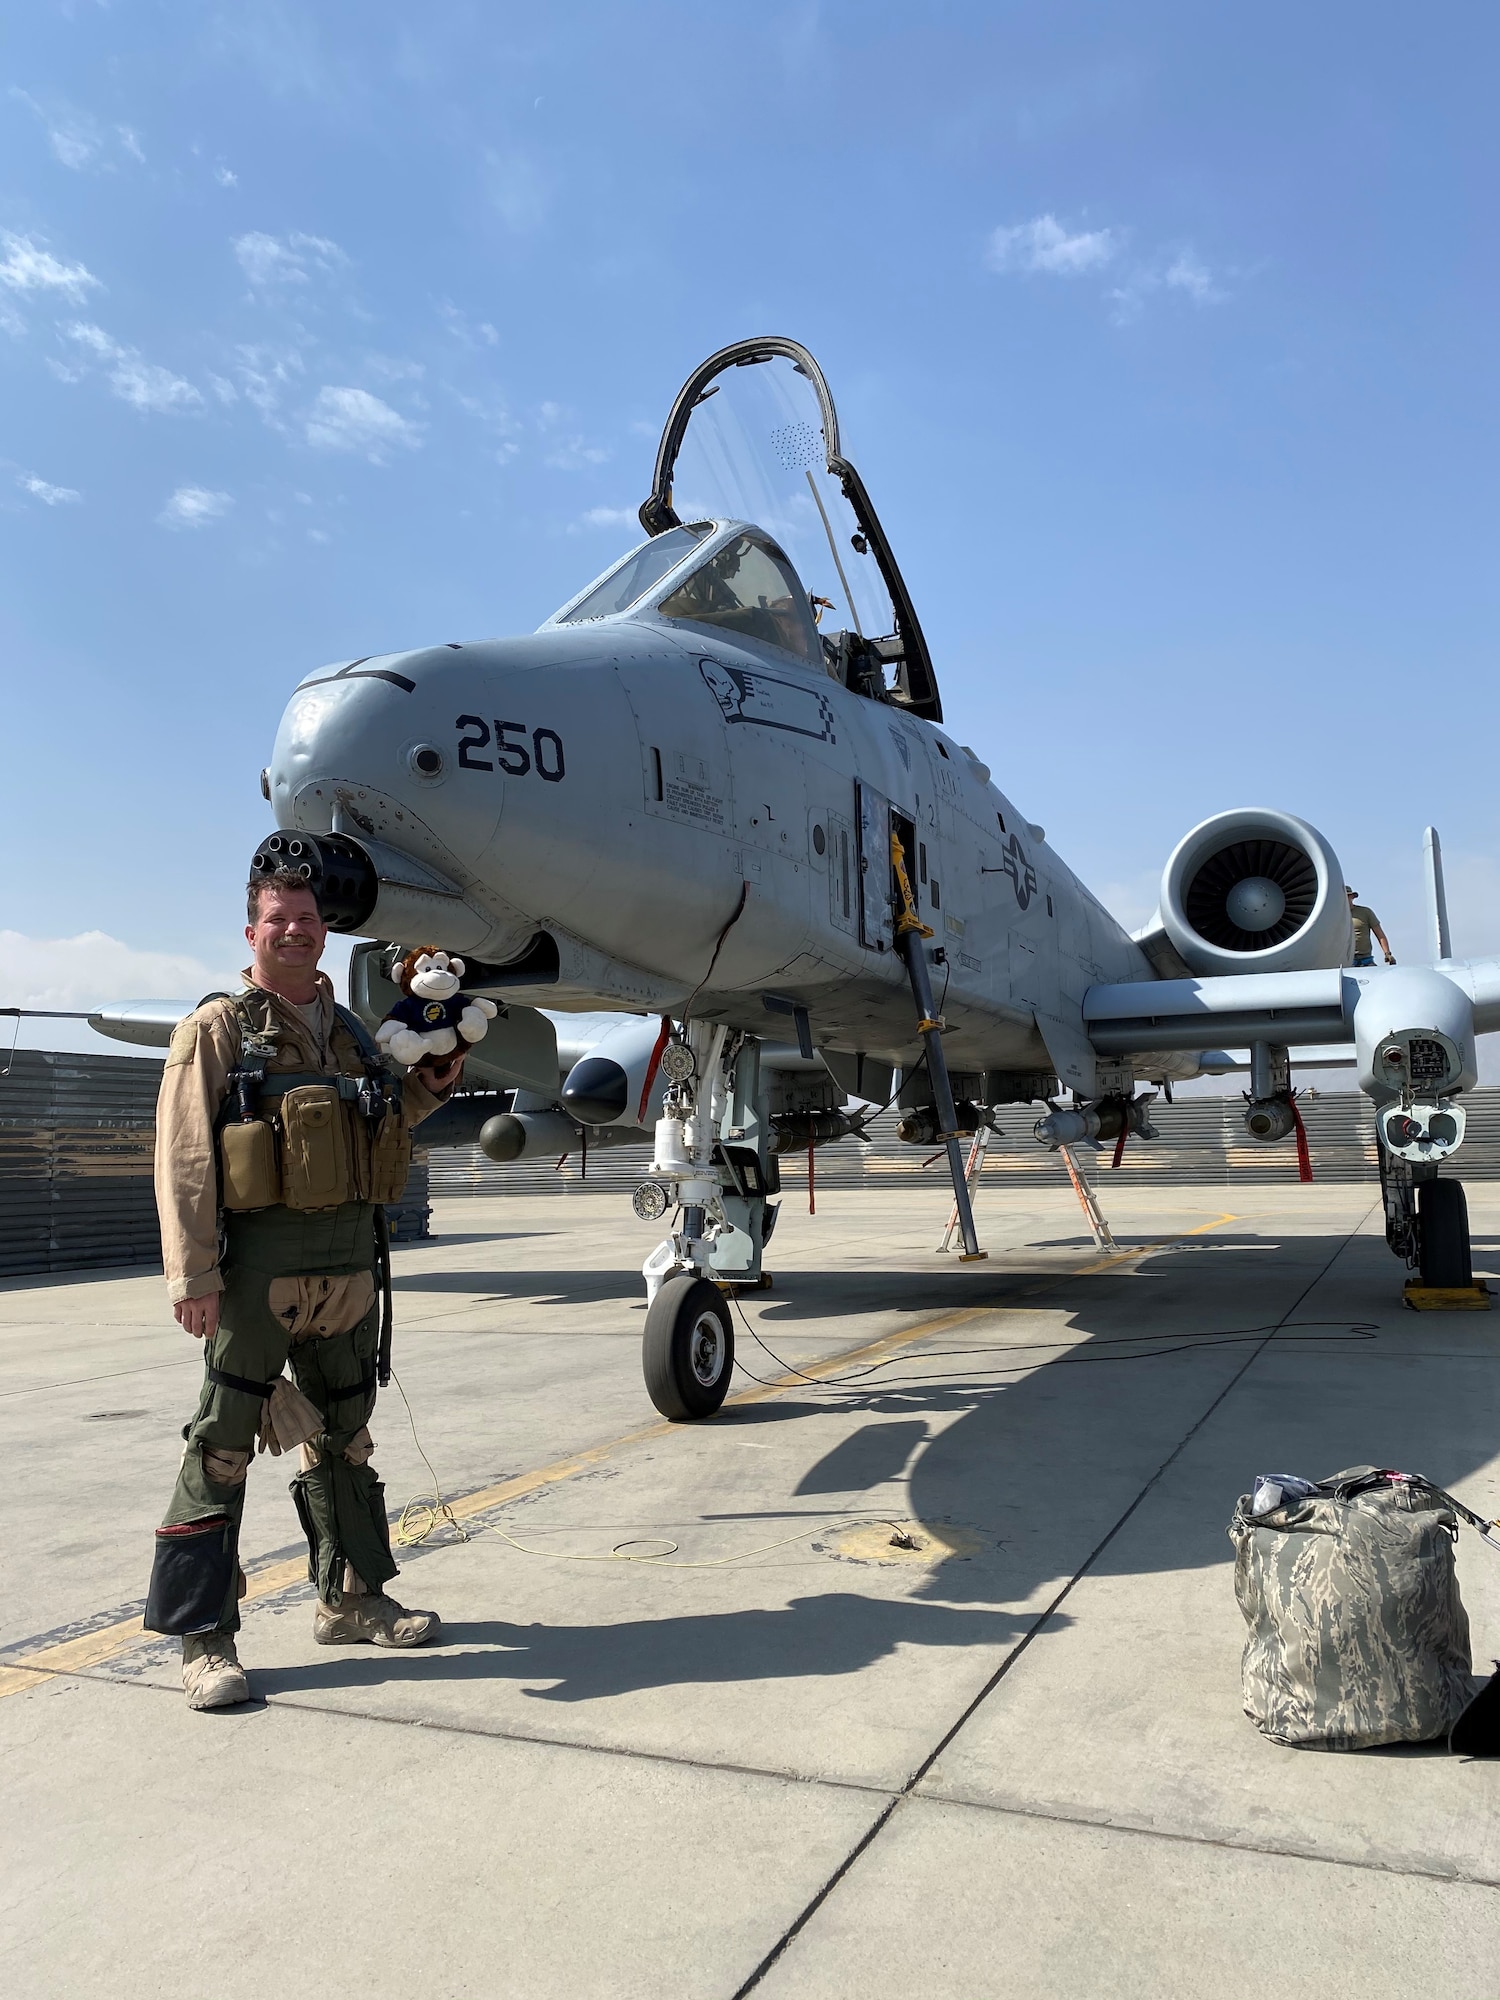 Lt. Col. Brian Leiter poses in front of an A-10C Thunderbolt II in Afghanistan during a 2020 deployment with the 303rd Expeditionary Fighter Squadron, a unit assigned to the 442d Fighter Wing.